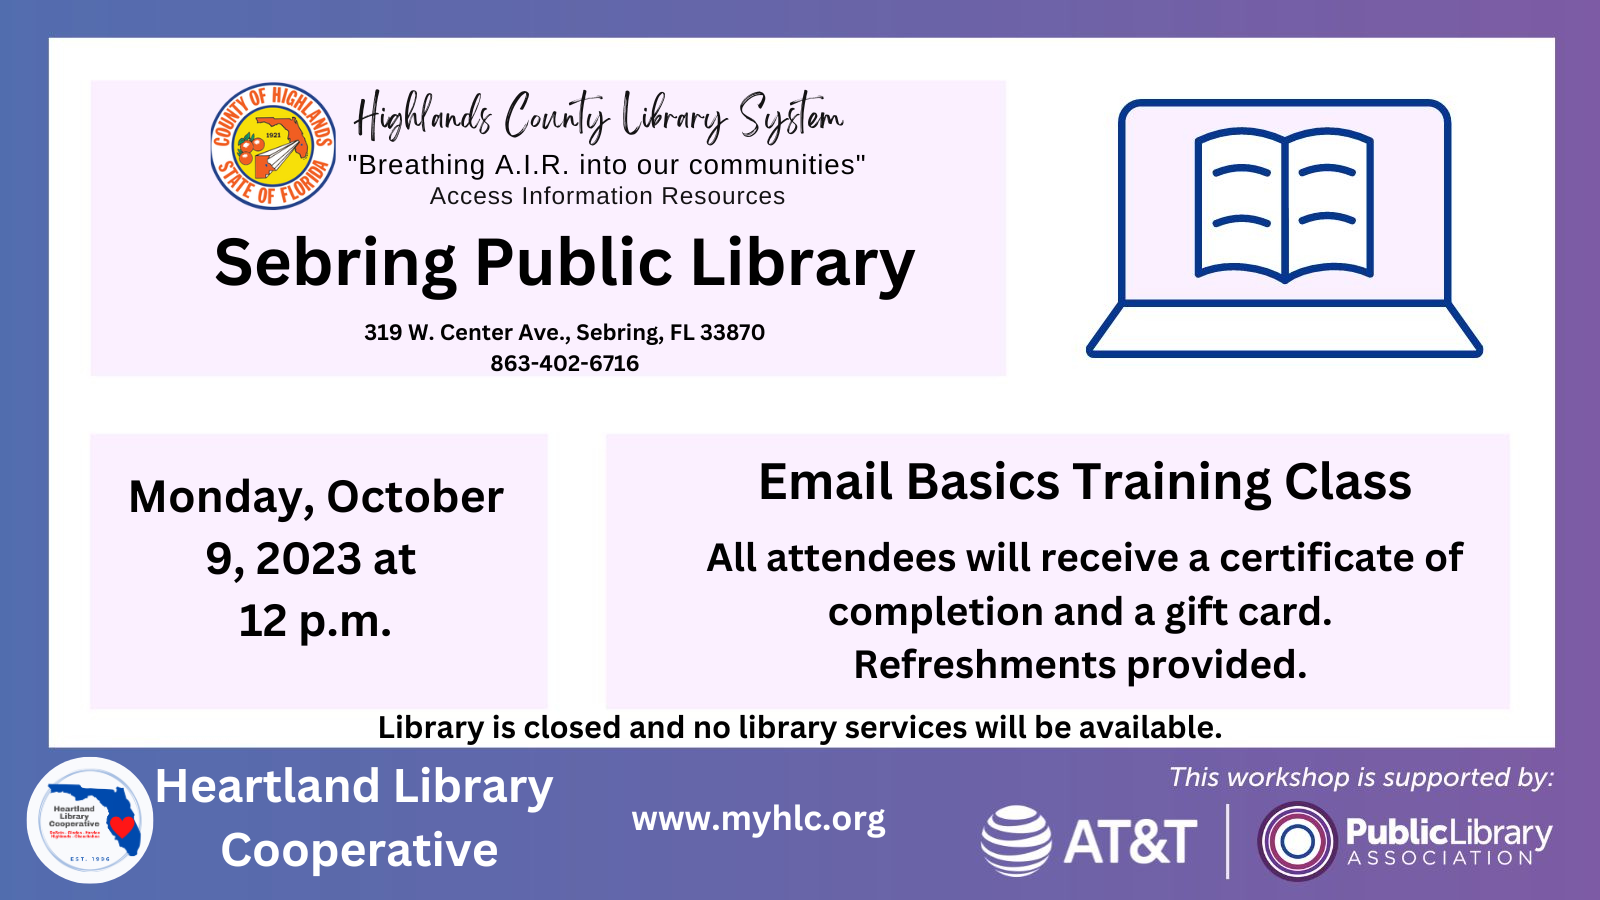 On Monday, October 9, 2023 at 12 p.m., the Sebring Public Library will host an email basics course.